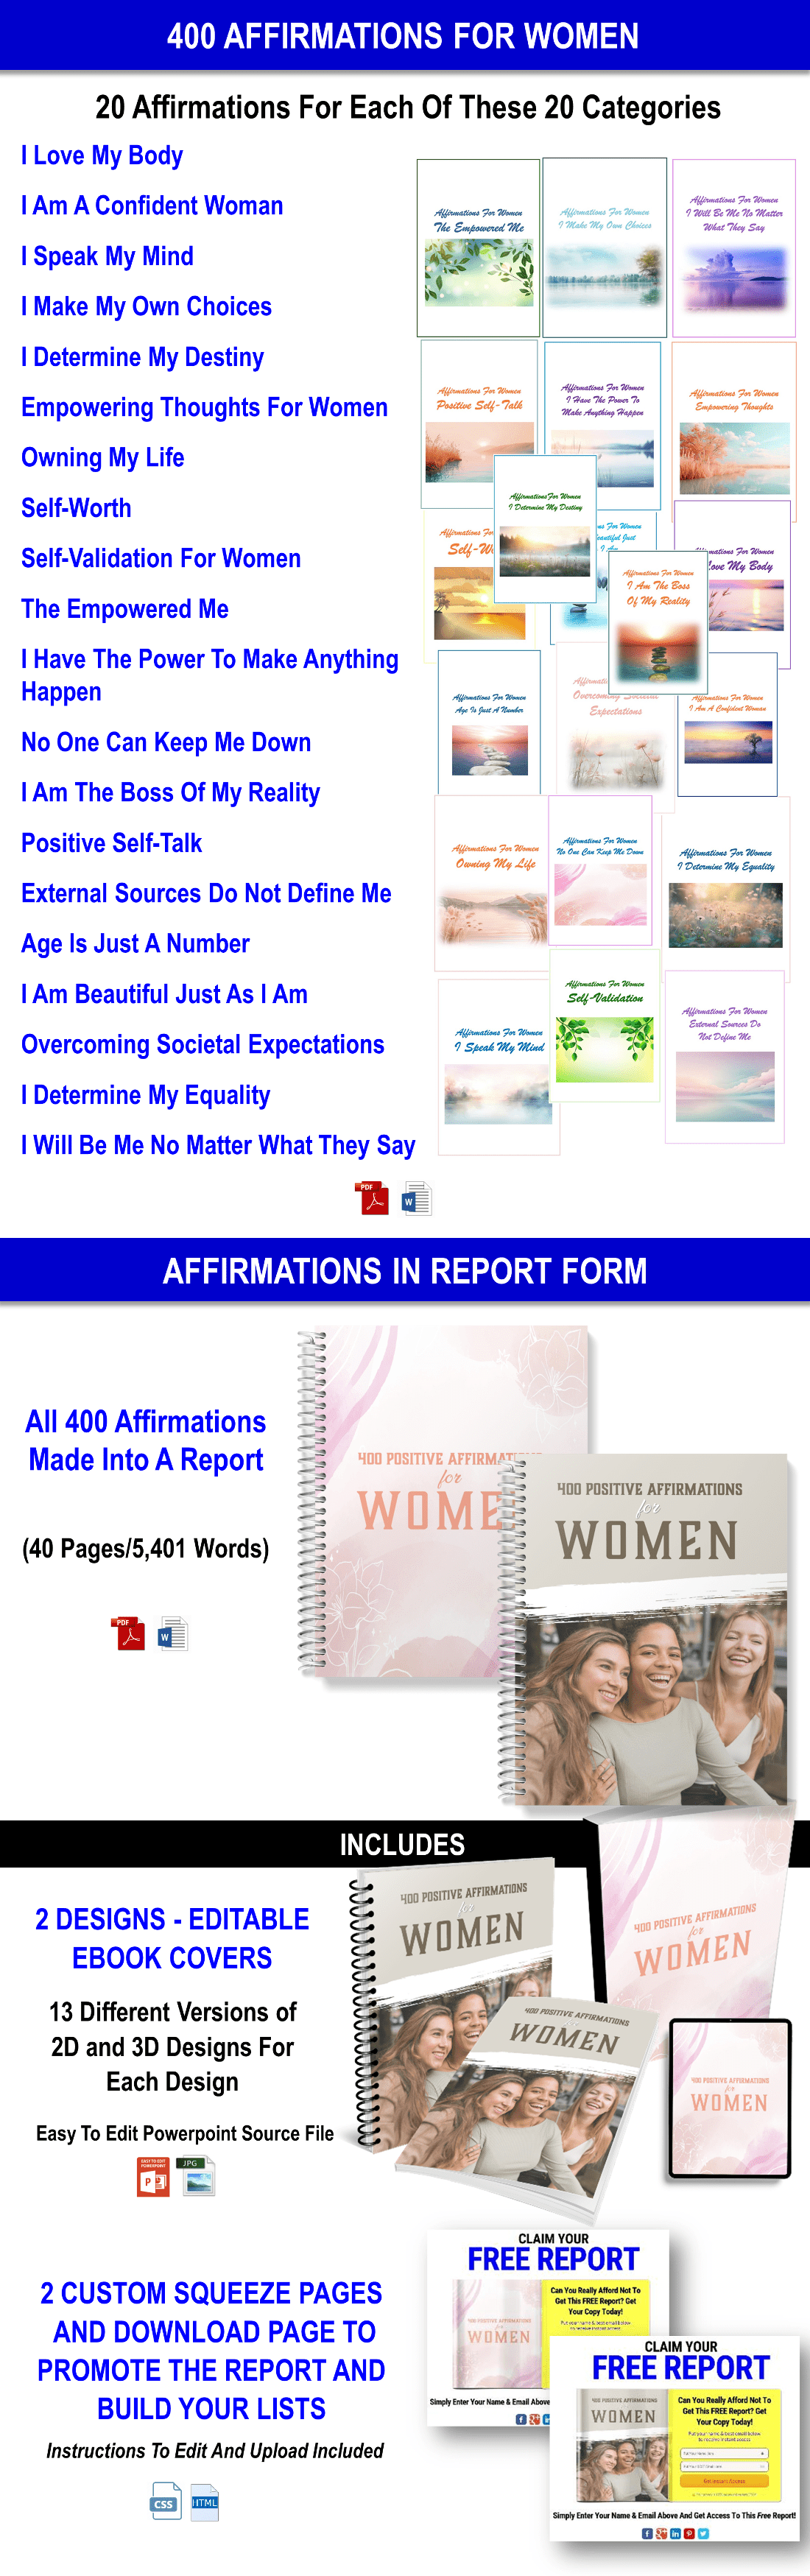 Be Well. Be Strong. Be You. - 400 Affirmations And Guided Meditations For Women Content Pack with PLR Rights